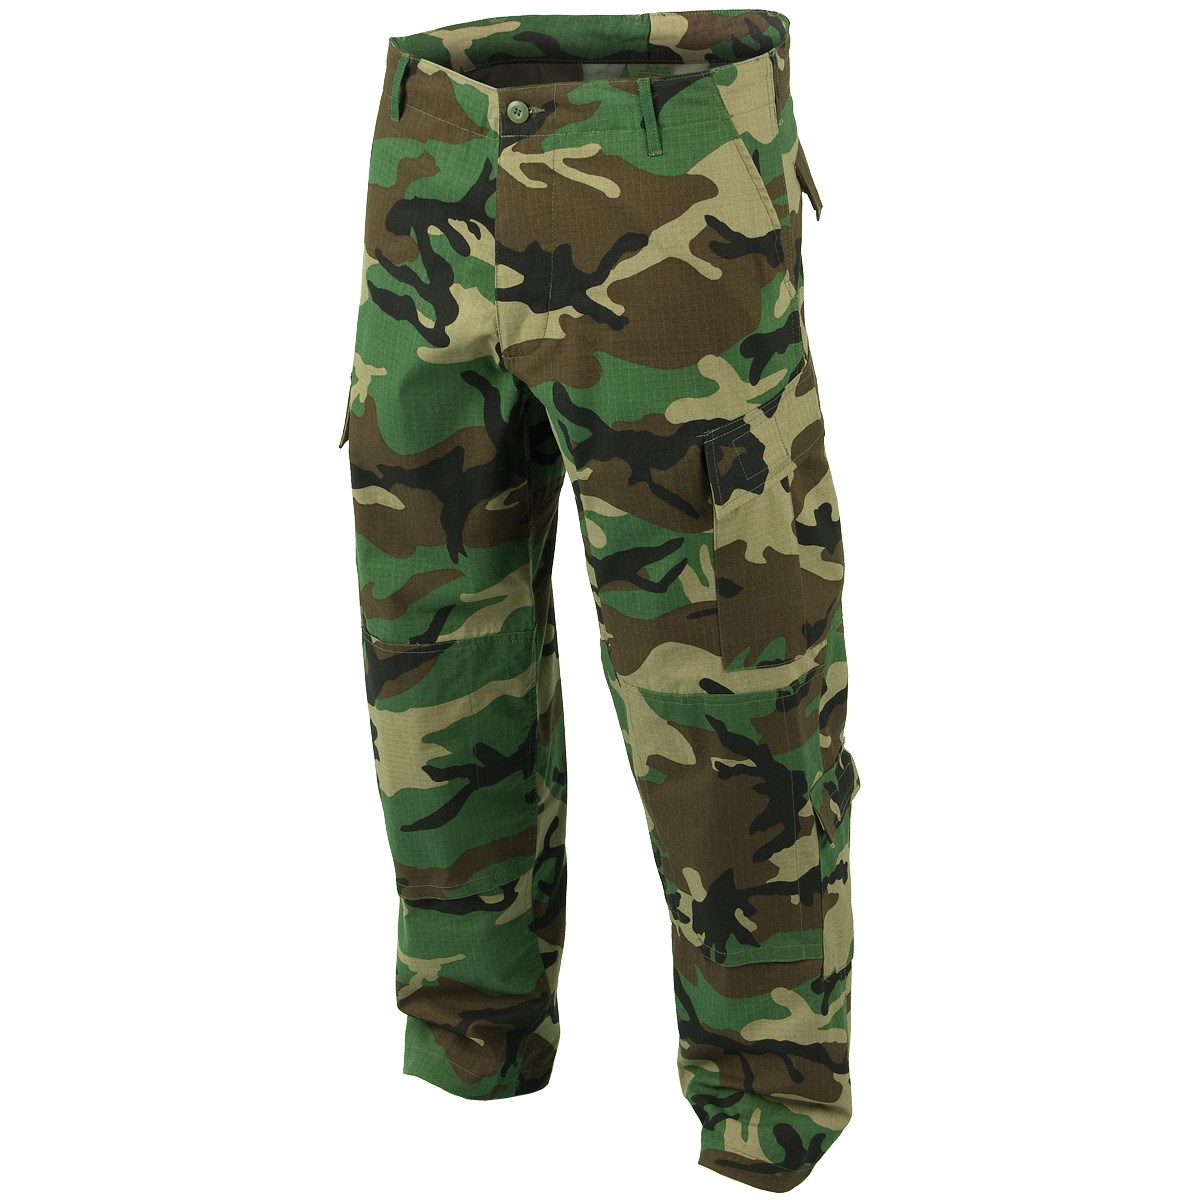 Bulgarian Army woodland camouflage winter Trousers Pants + Liner sz. XL -  Simpson Advanced Chiropractic & Medical Center